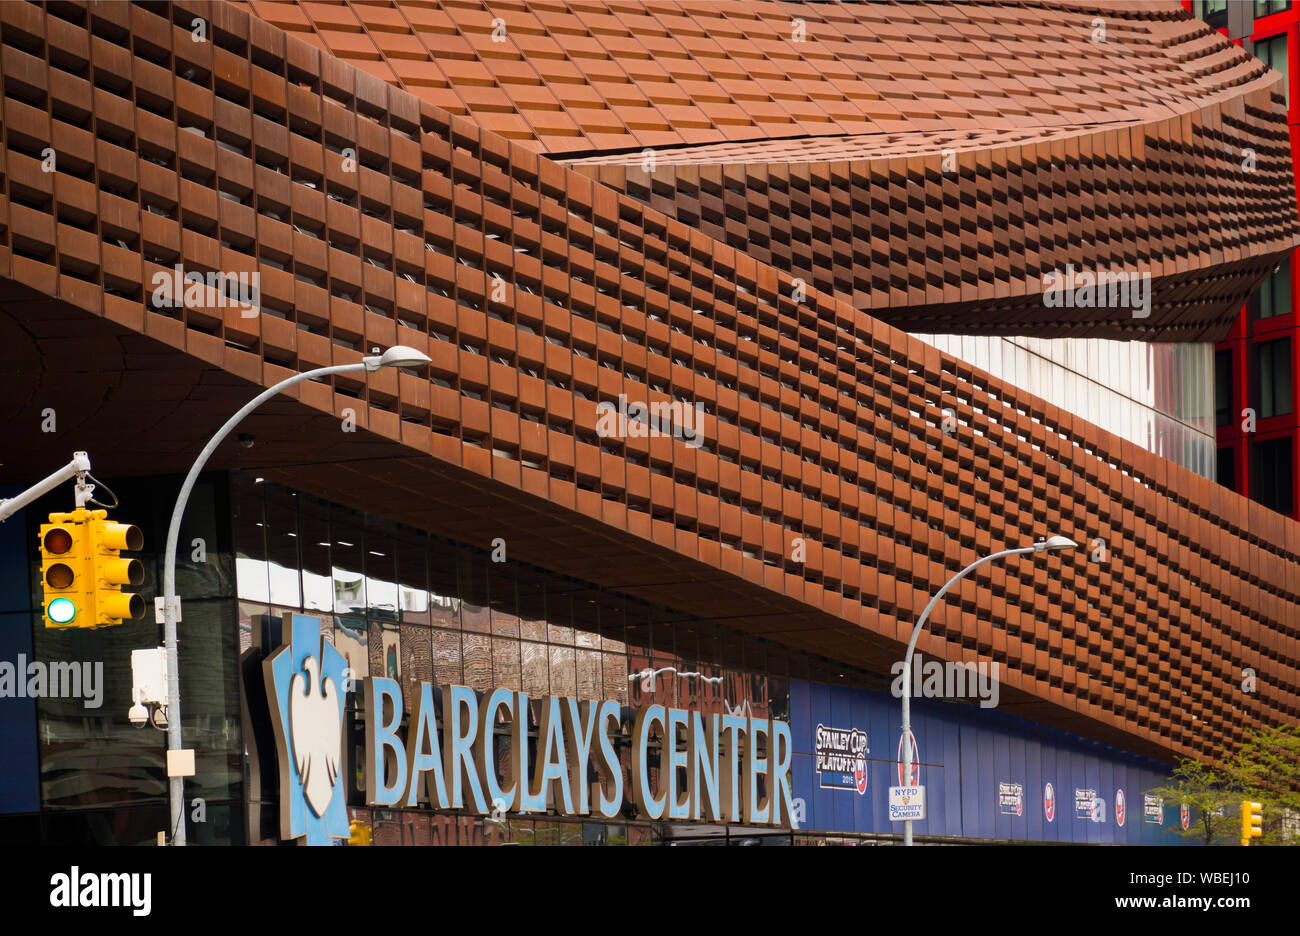 Barclay center in downtown Brooklyn NYC Stock Photo